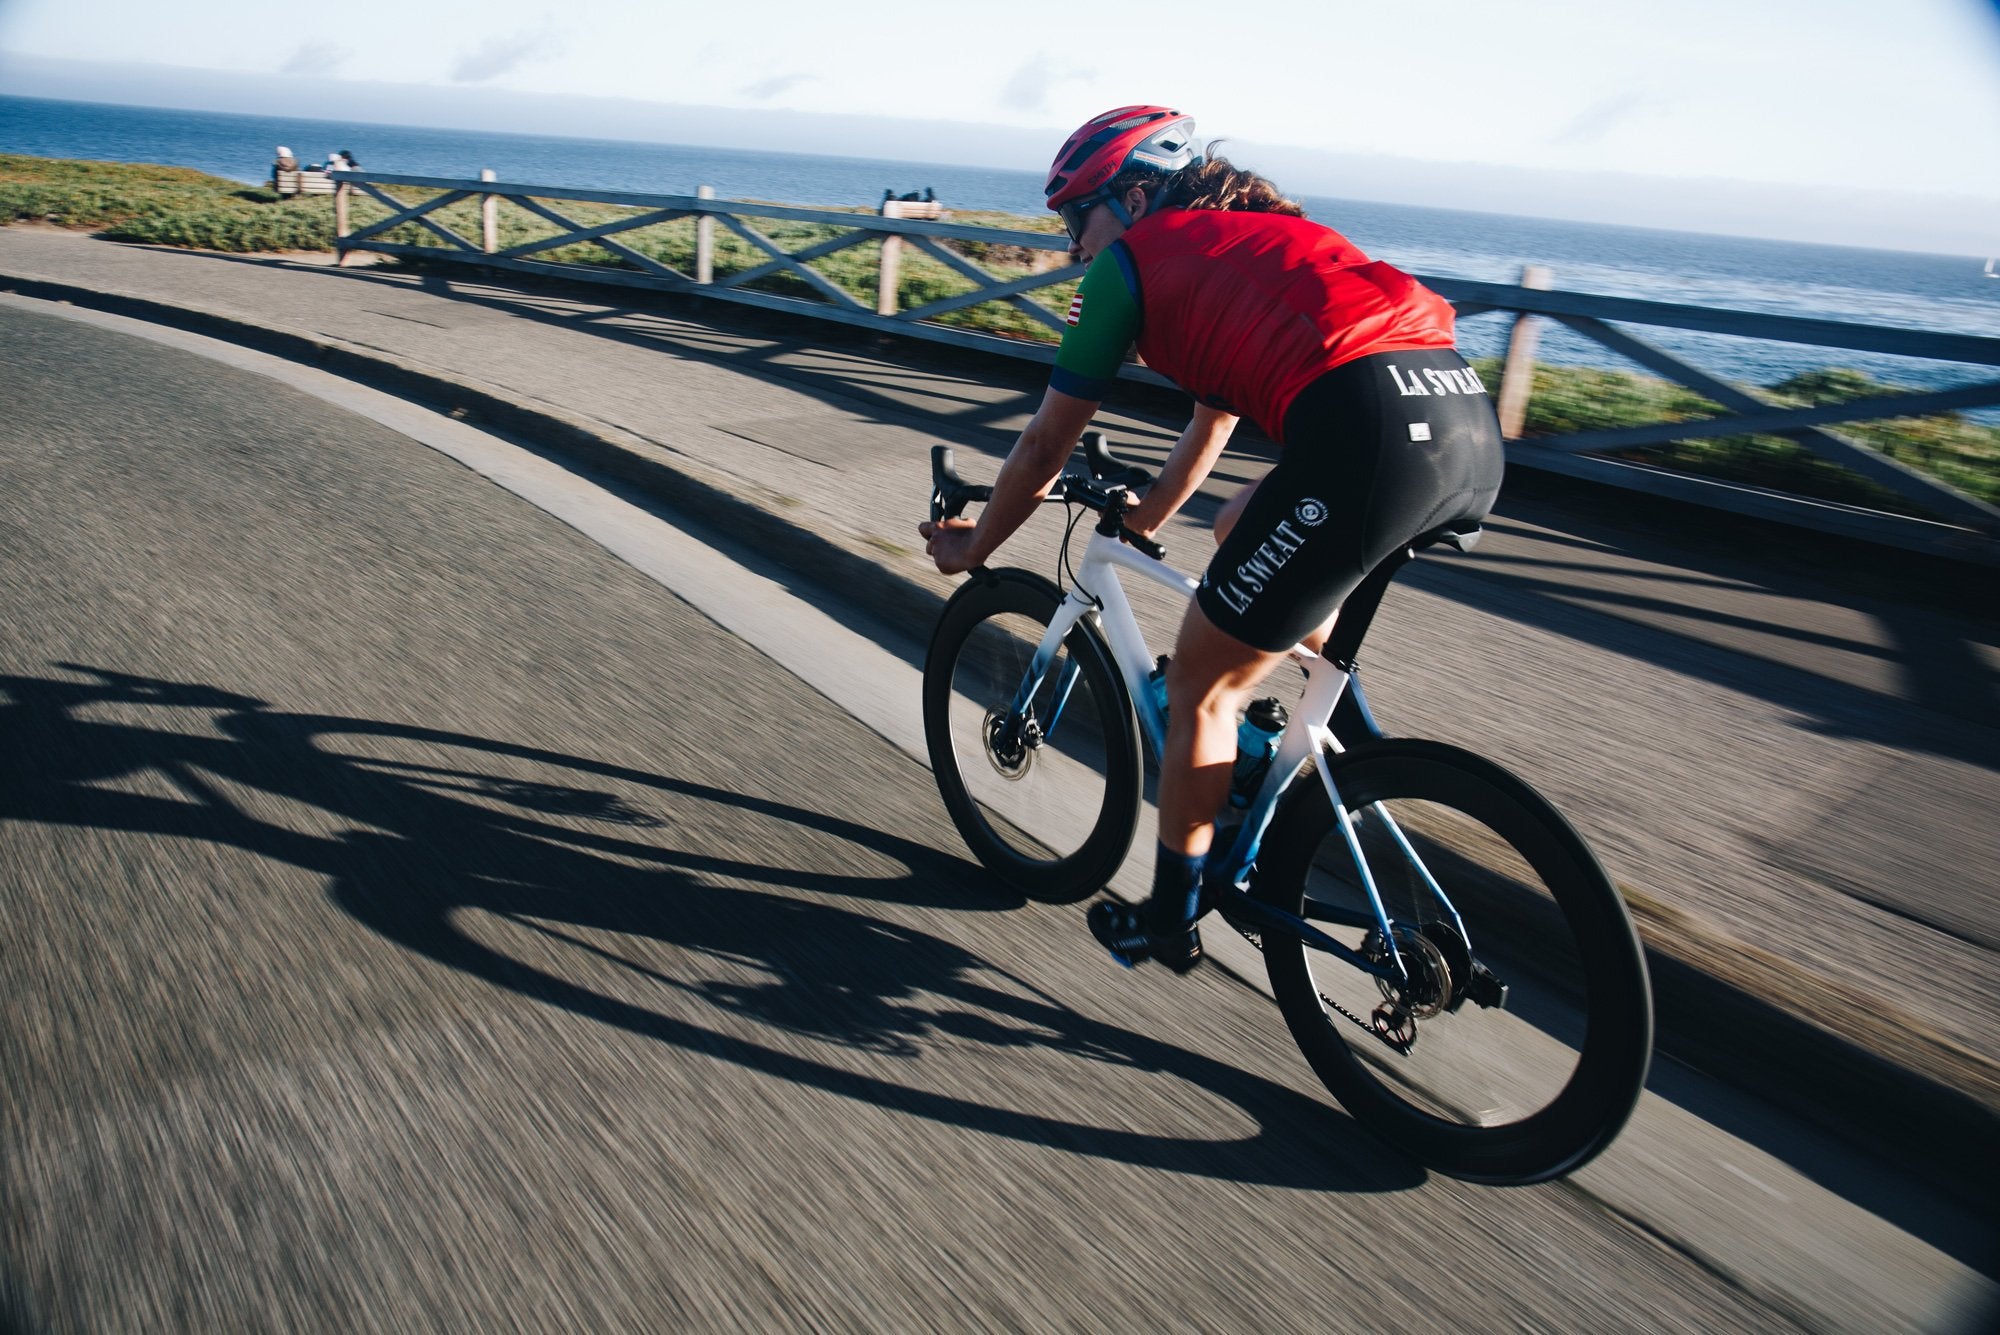 <h1>Tires</h1><i>At Hunt we enjoy the puncture resistance and grip benefits of tubeless on our every-day rides so we wanted to allow you the same option, but of course these tubeless-ready wheels are also designed to work perfectly inner tubes, just use tubes in tubeless ready tires.</i>